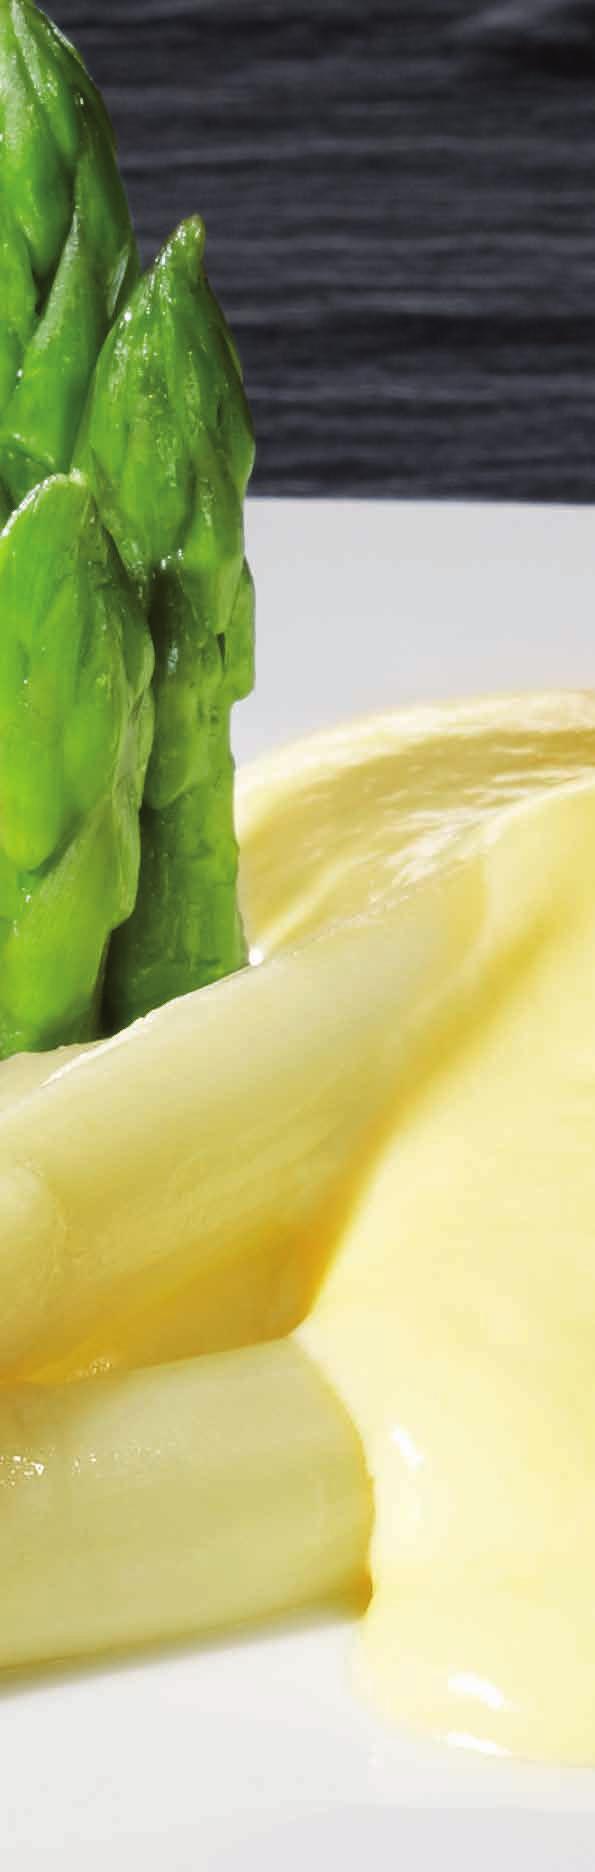 HINT To achieve any variation of the classic Sauce Hollandaise, such as Sauce Bernaise or Sauce Maltaise, simply adjust the basic recipe by adding other aromatics. The sauce can be cooked au gratin.